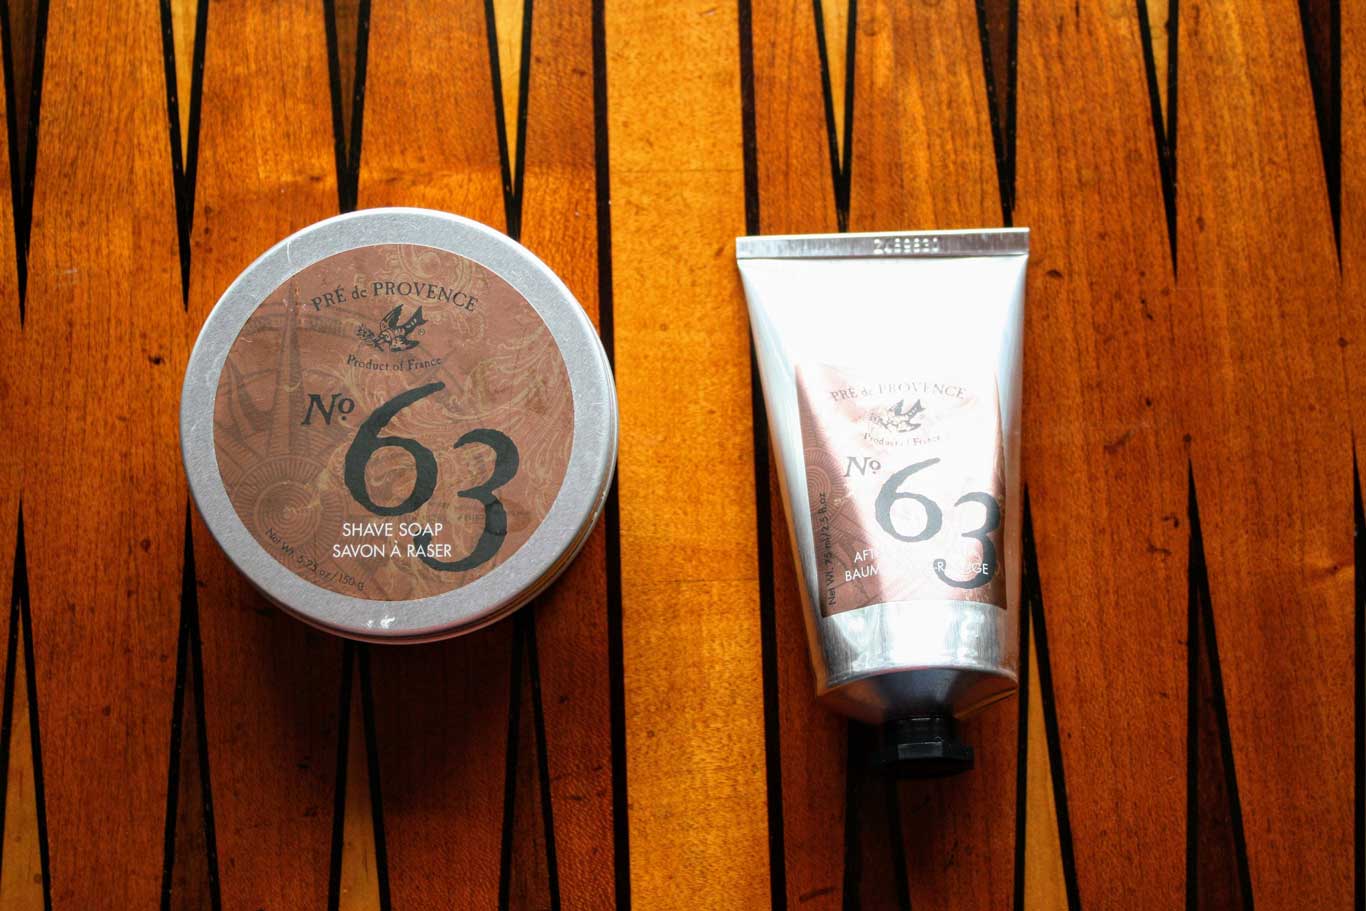 Pre de Provence 63 Shaving Soap and Aftershave Balm Review  Tailor